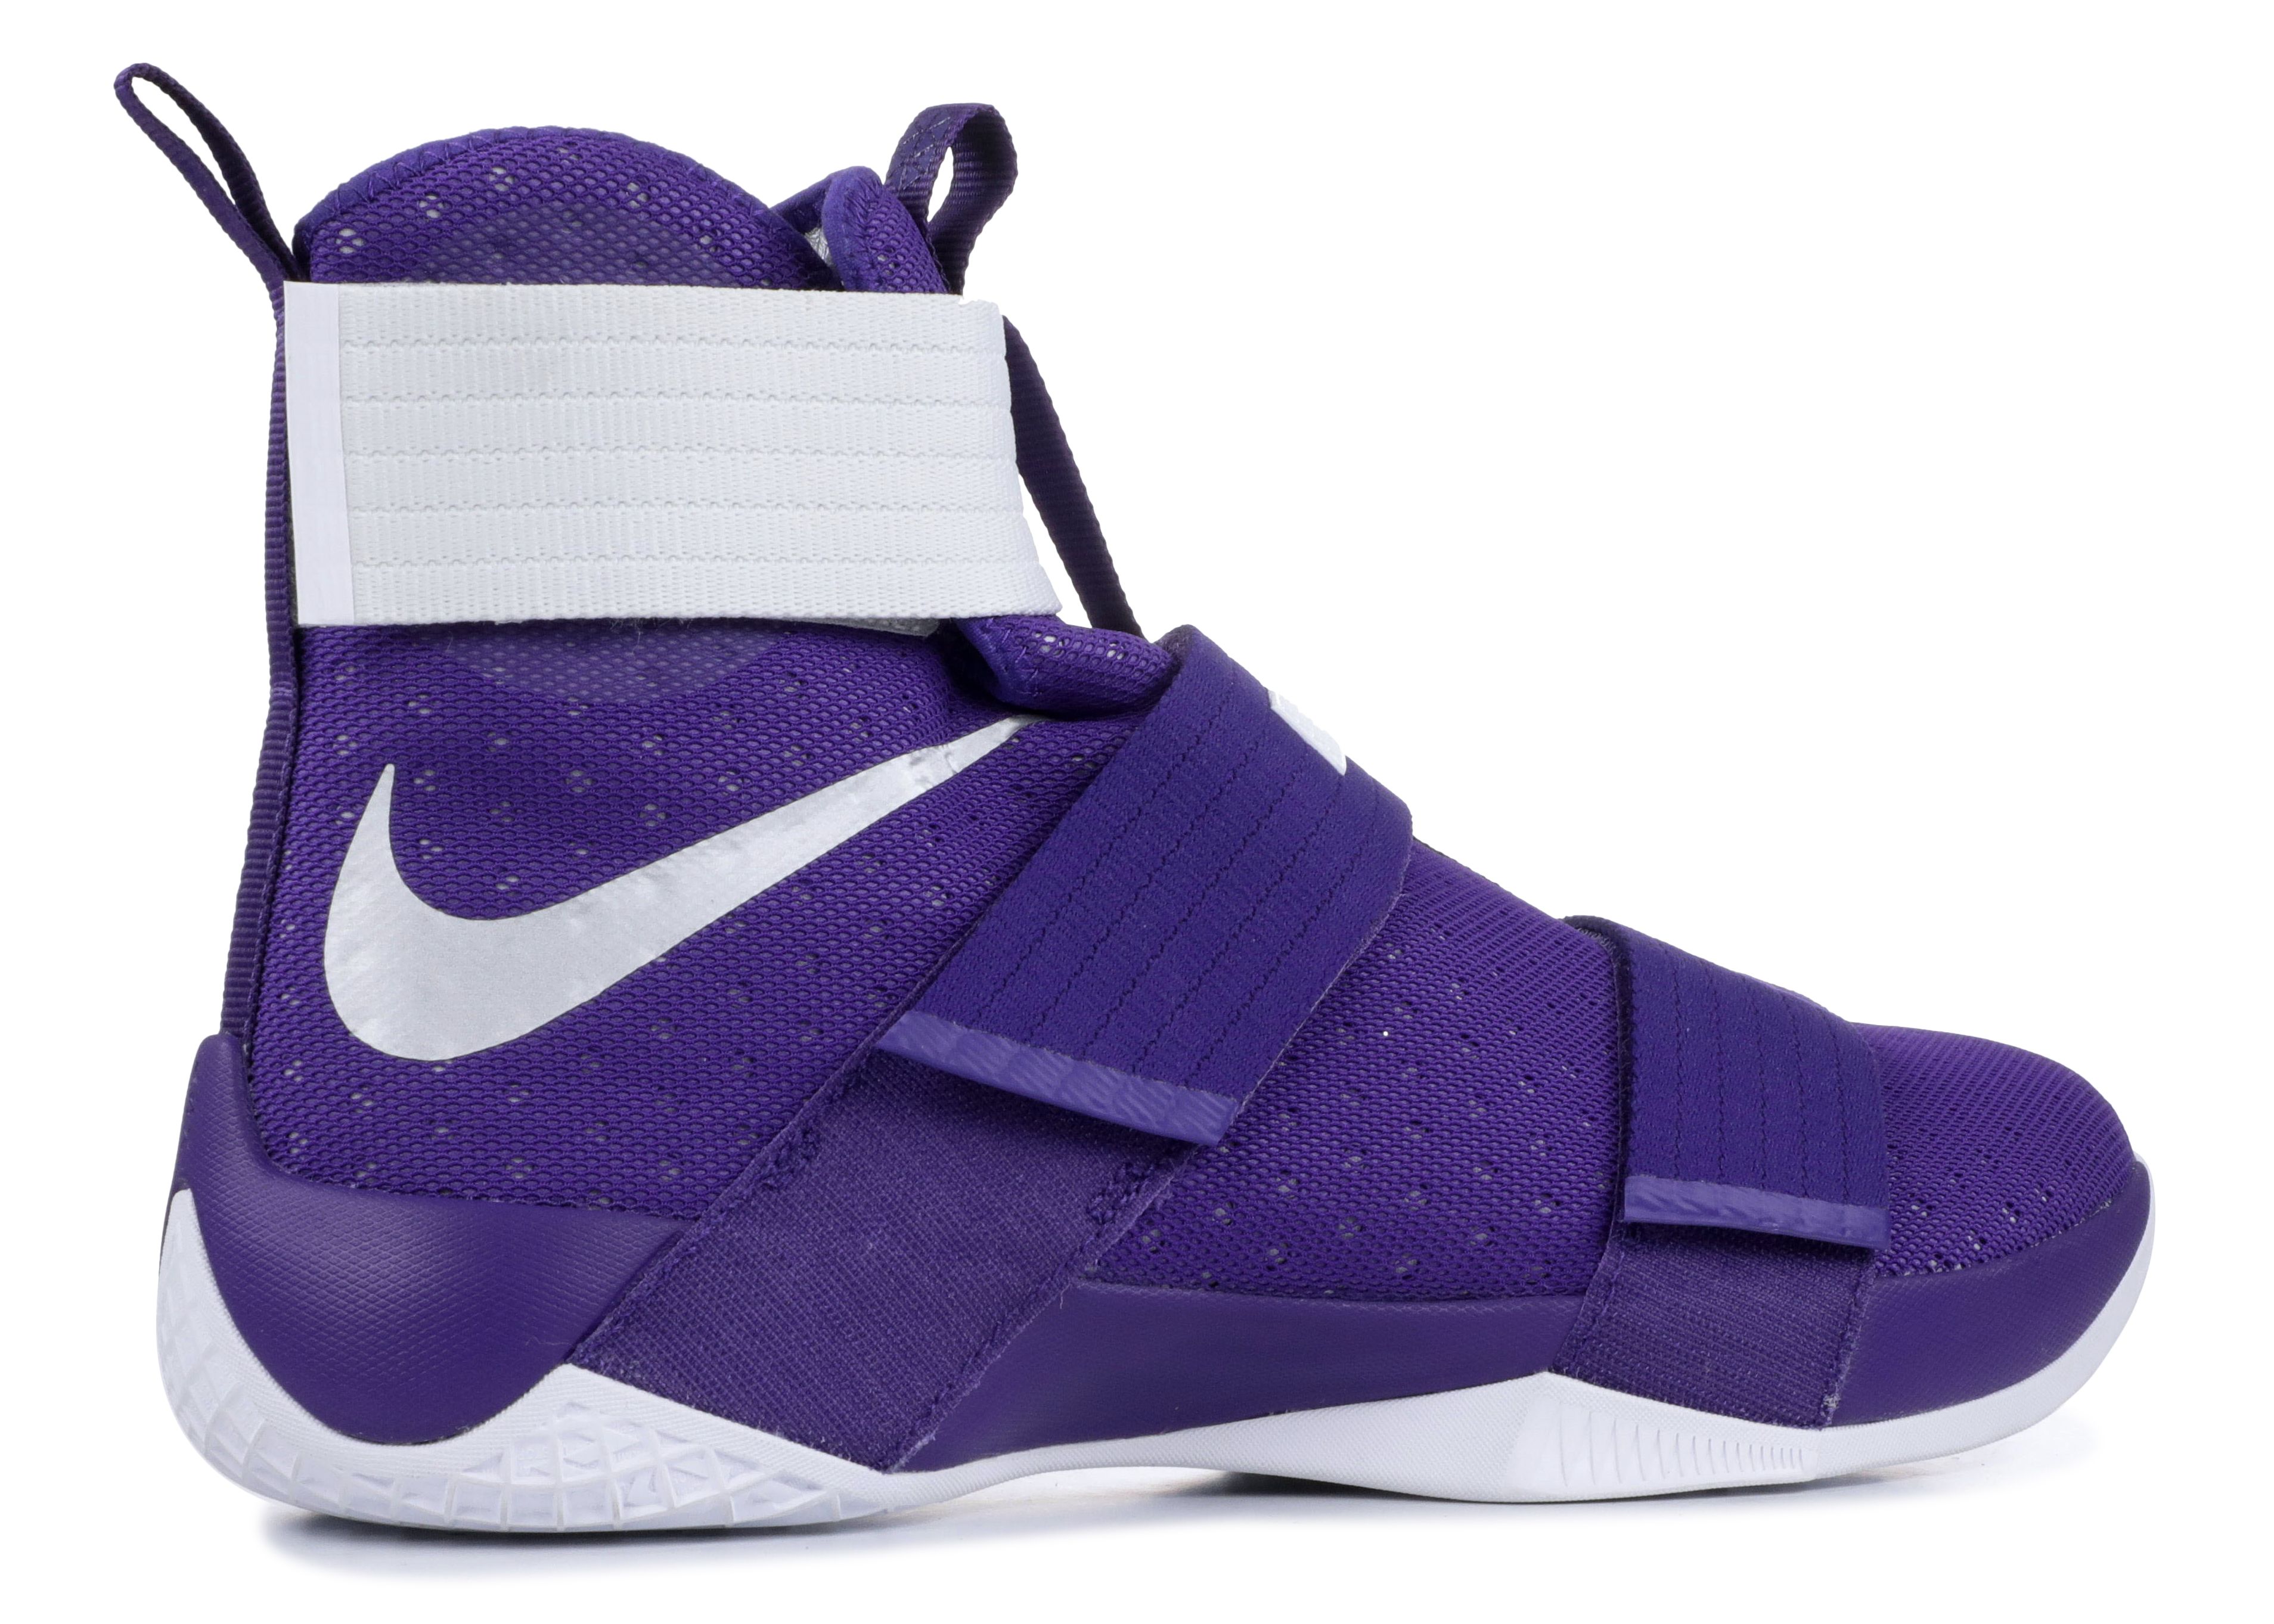 lebron soldier 10 black and purple